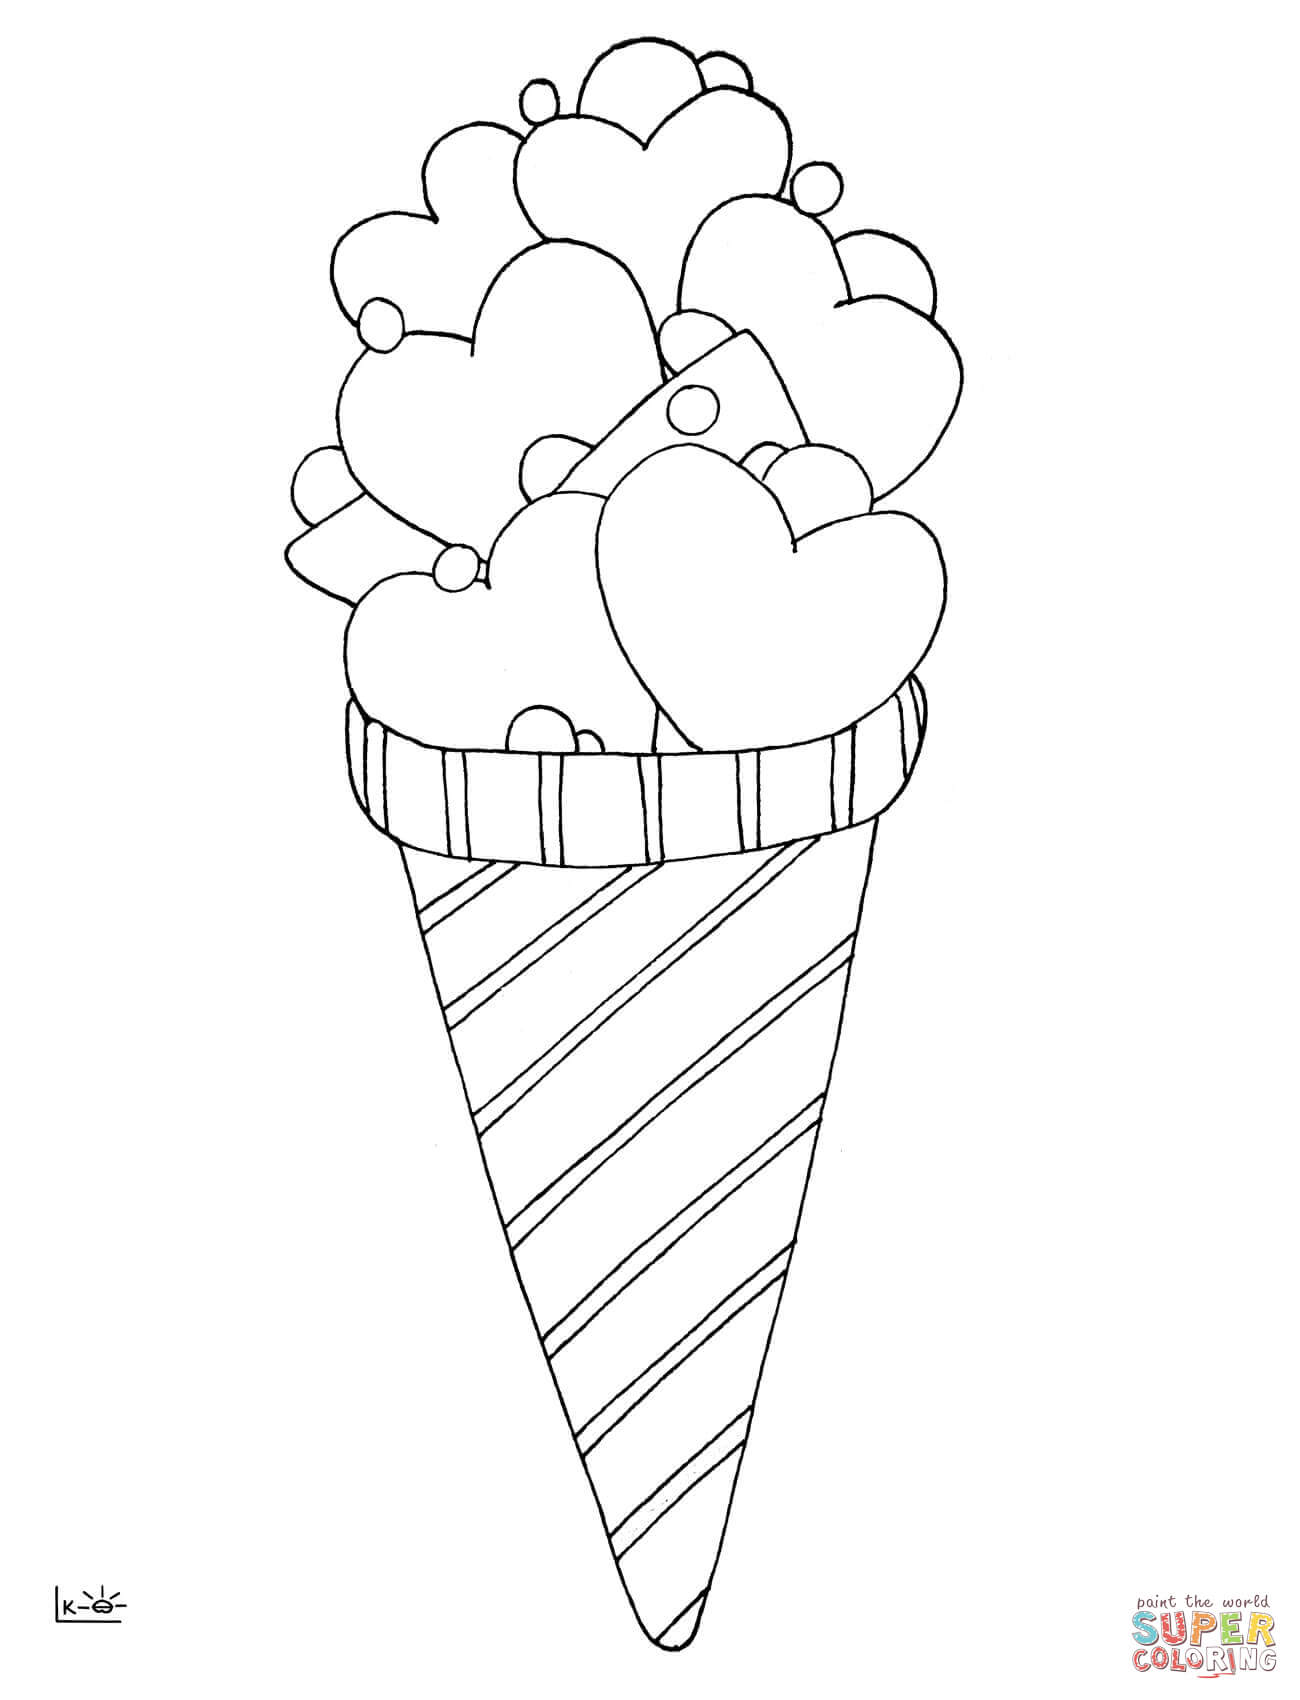 Icecream Cone Coloring Page at Free